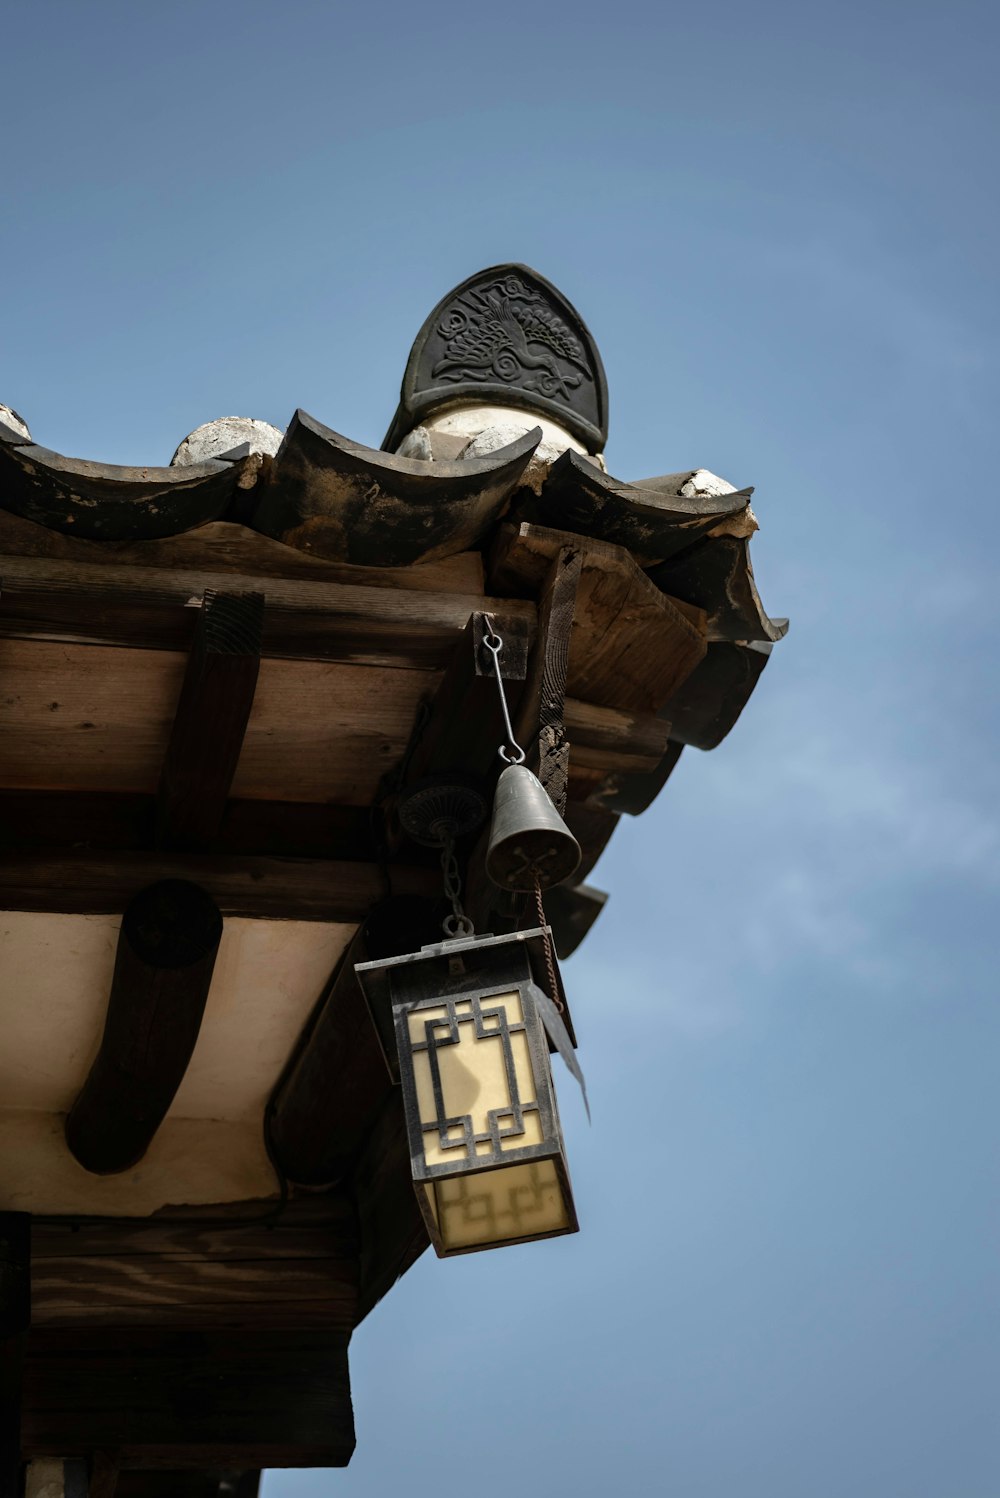 a lantern hanging from the roof of a building